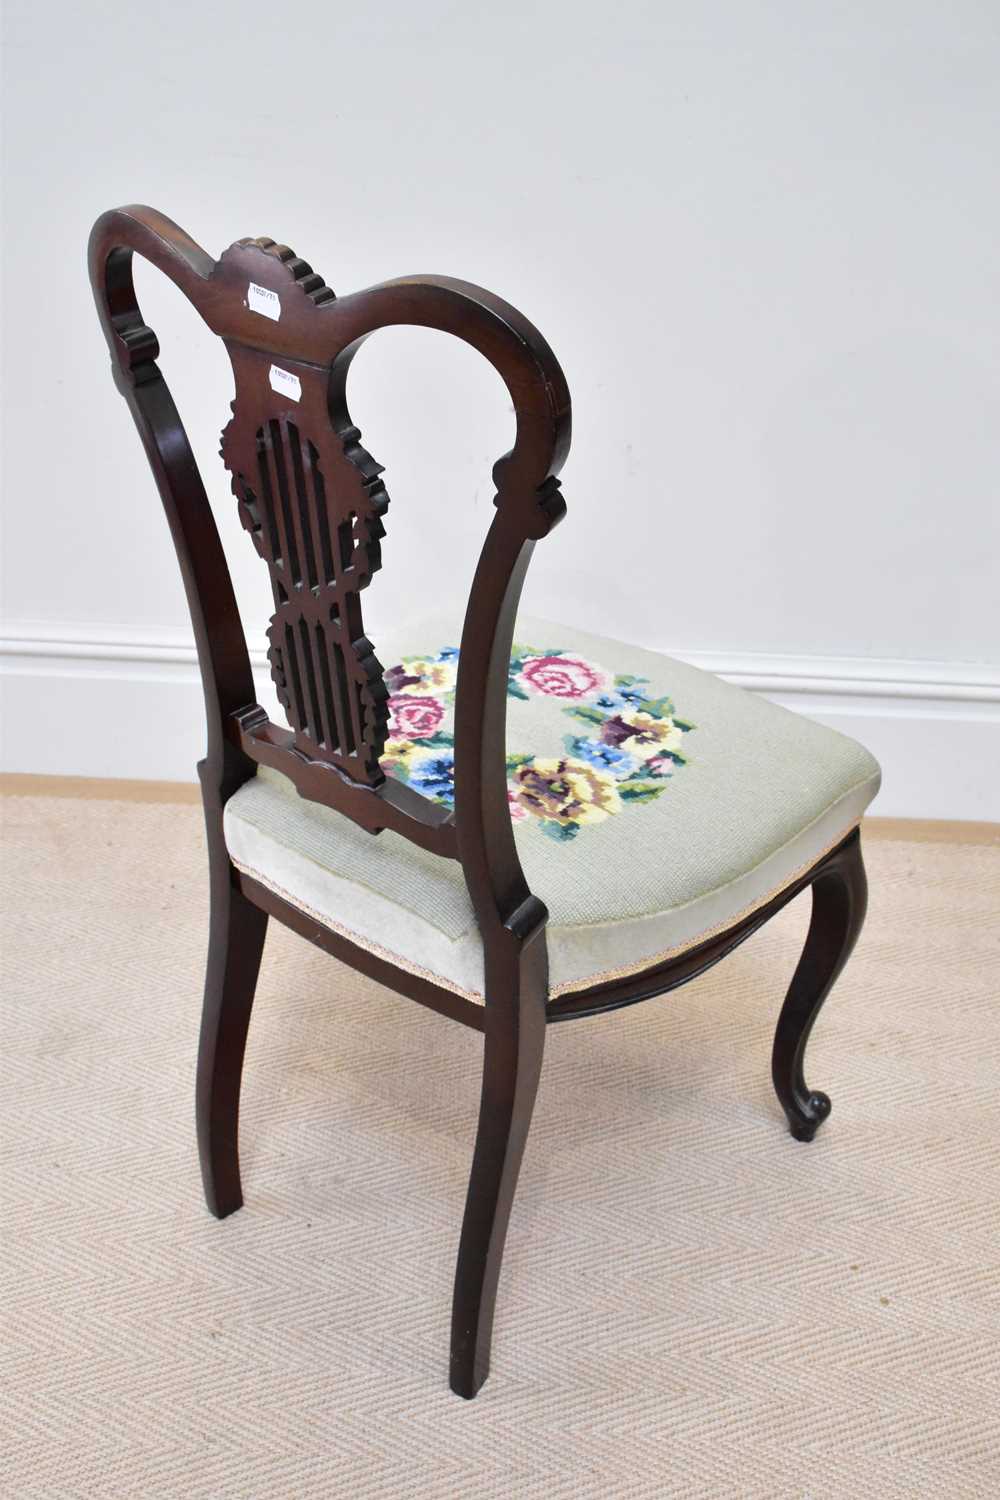 An Edwardian mahogany framed side chair, with carved open pierced back and floral woolwork seat. - Image 2 of 3